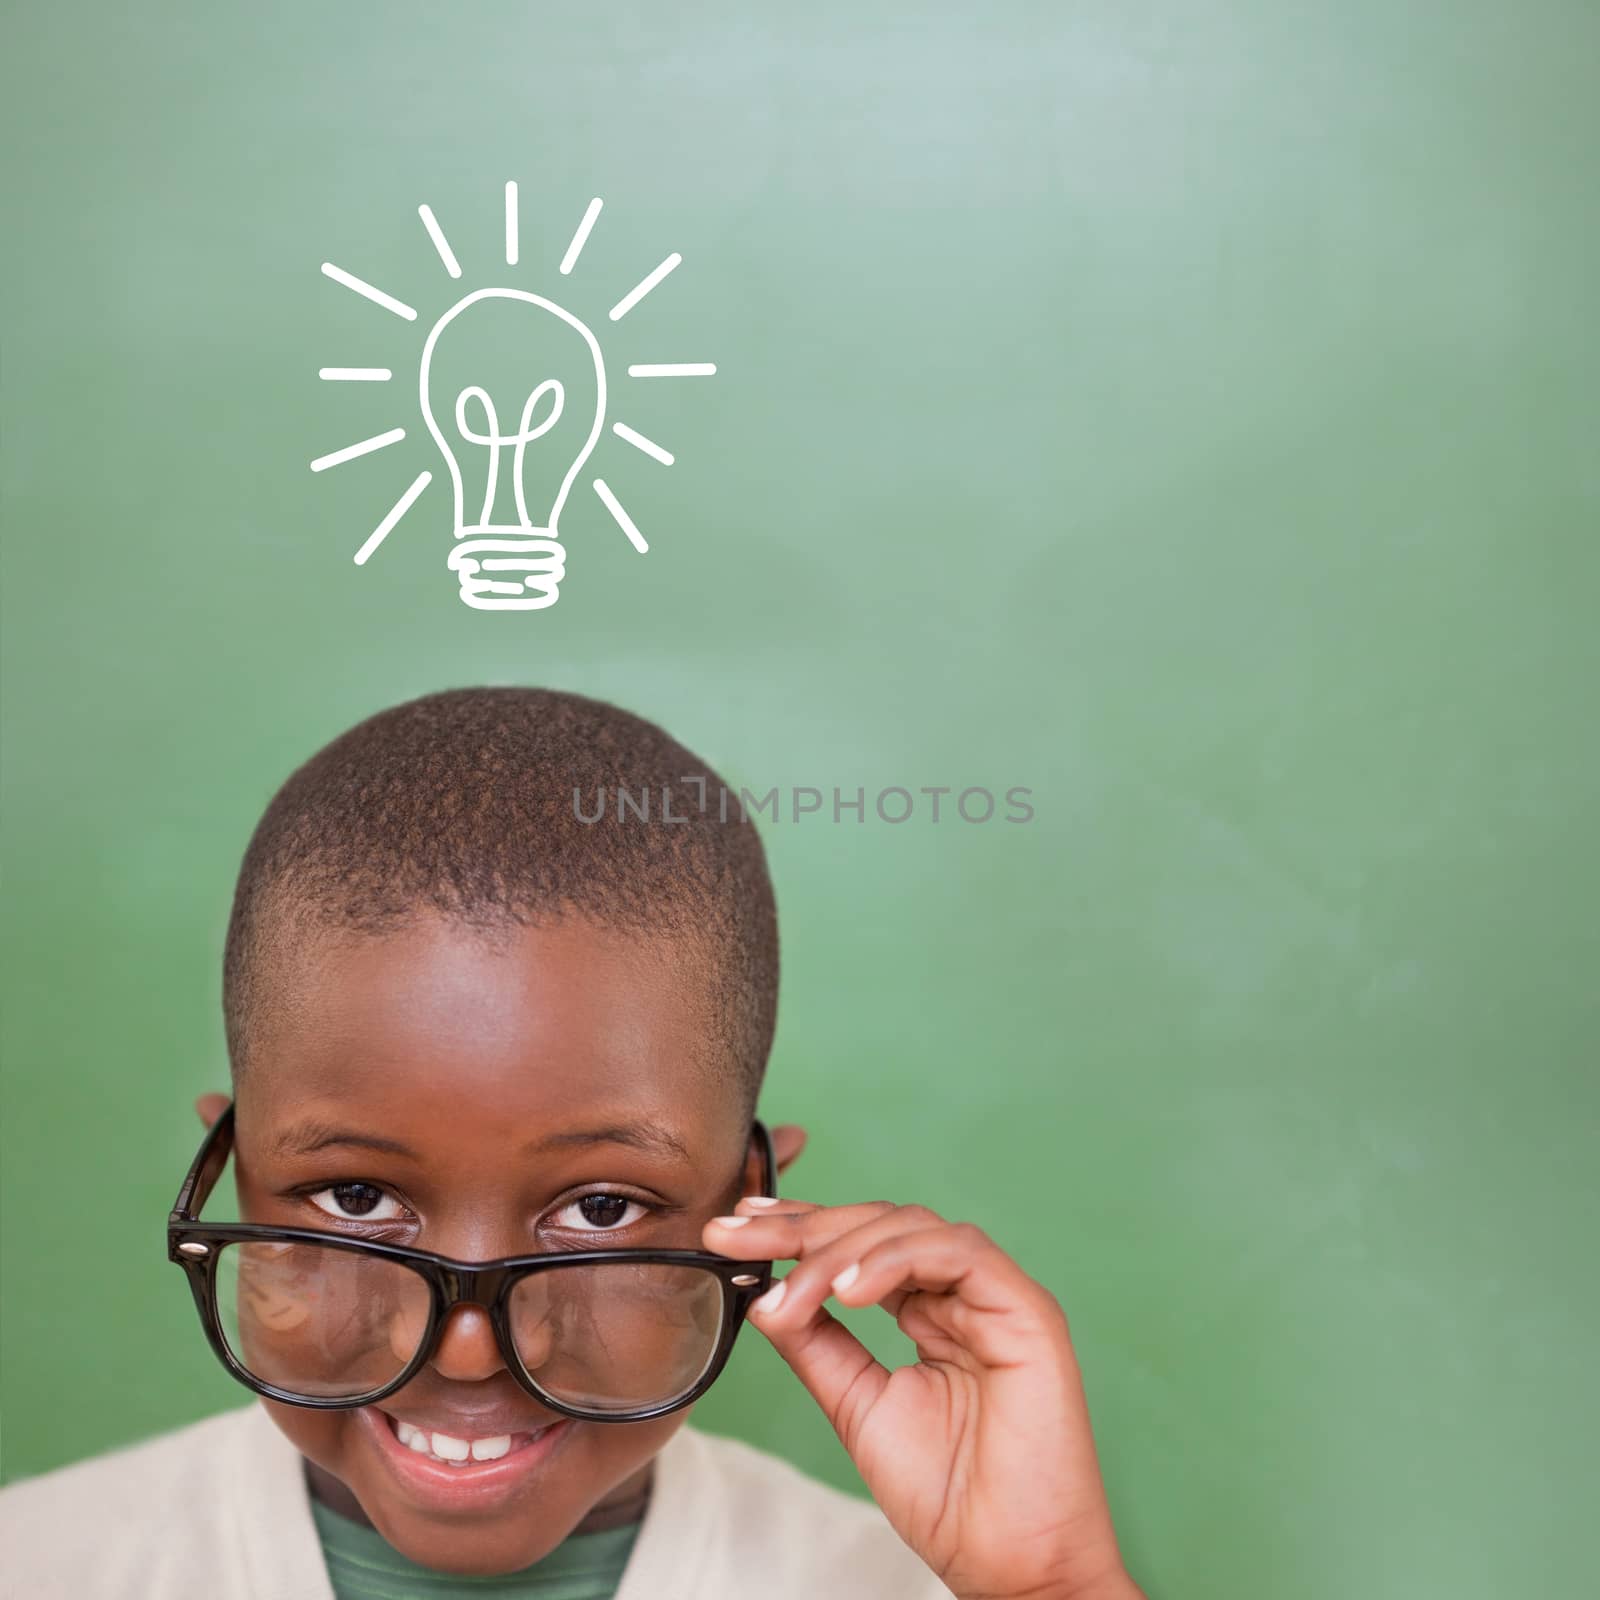 Cute pupil tilting glasses against idea and innovation graphic